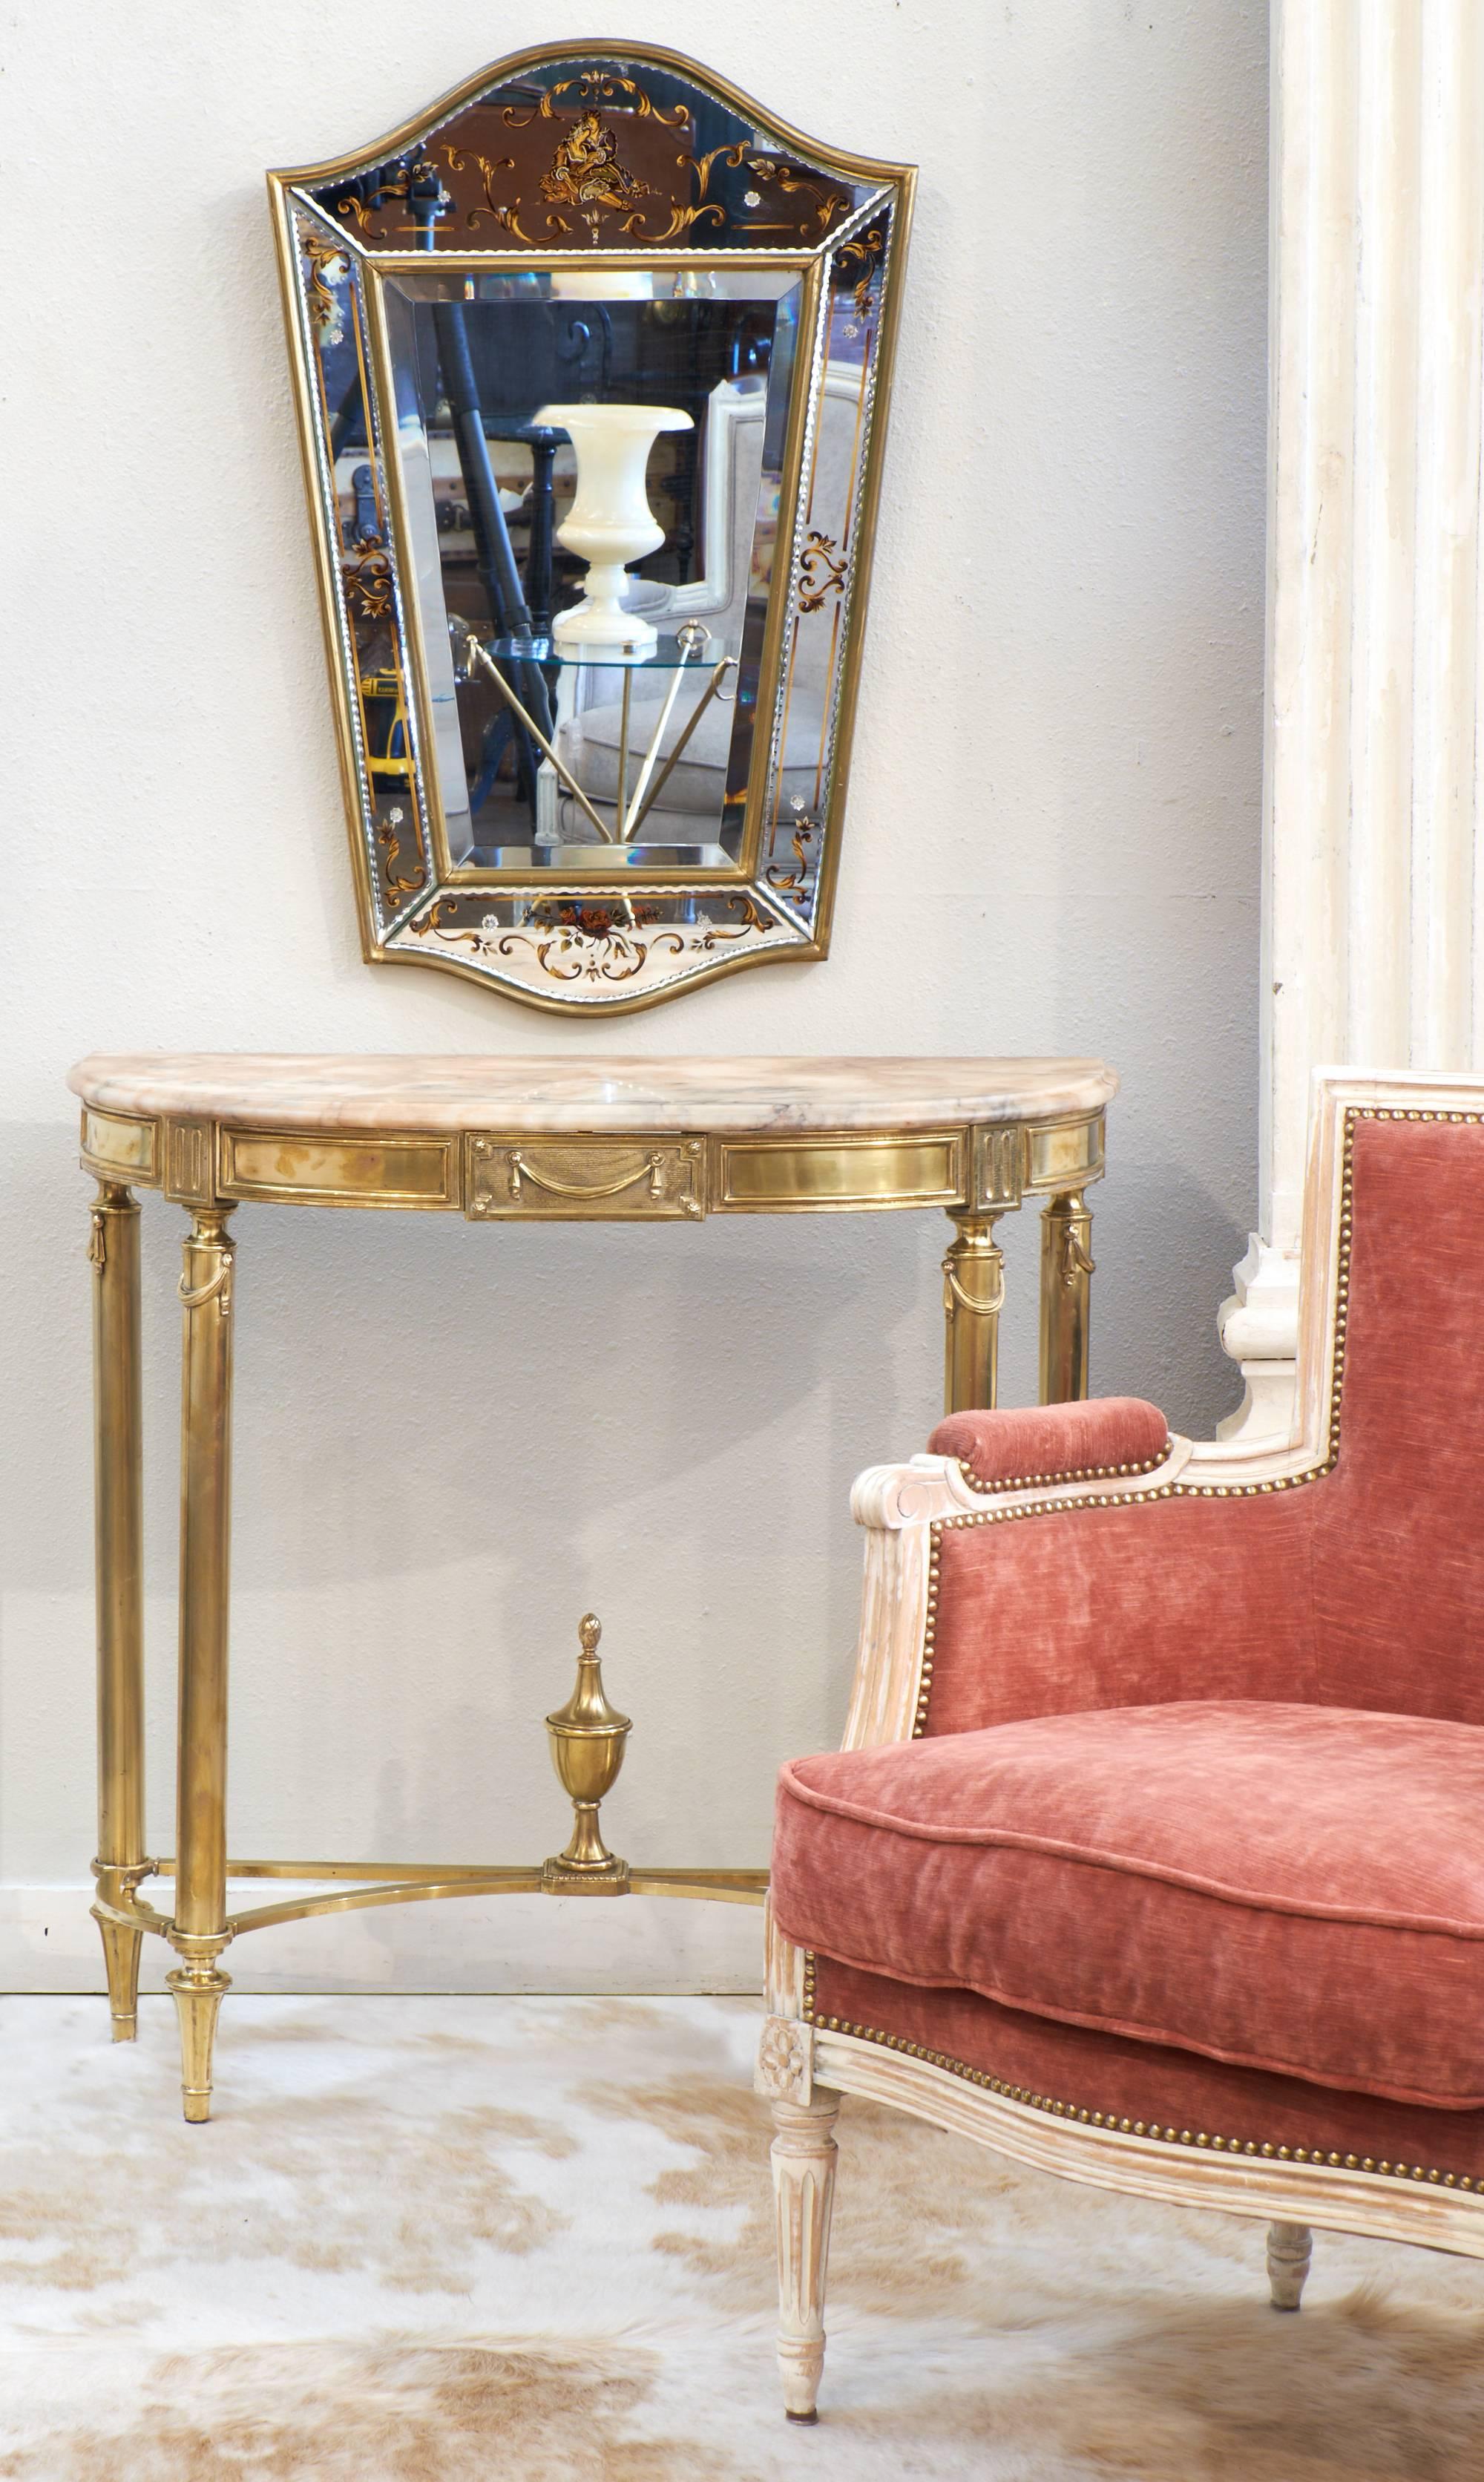 French vintage neoclassical style demilune console table decorated with hanging laurel garlands and a classical urn on the stretcher. Marble top and brass base with 